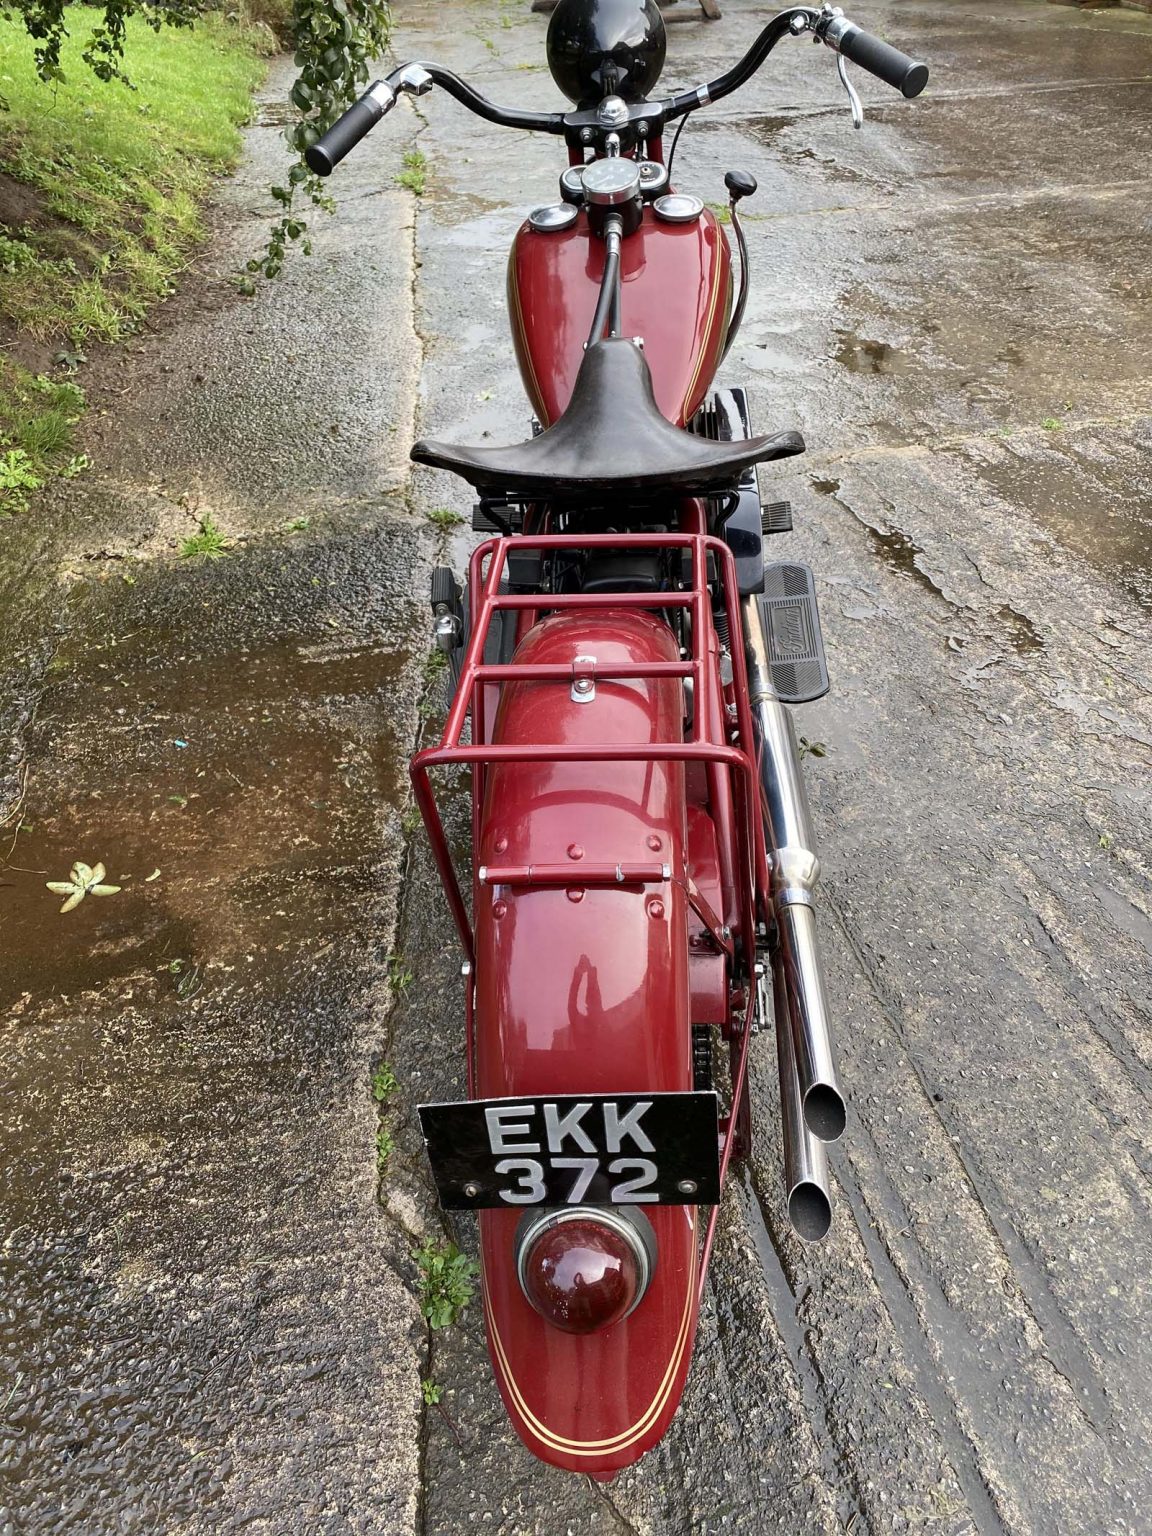 1937 Indian Four 437 Rear